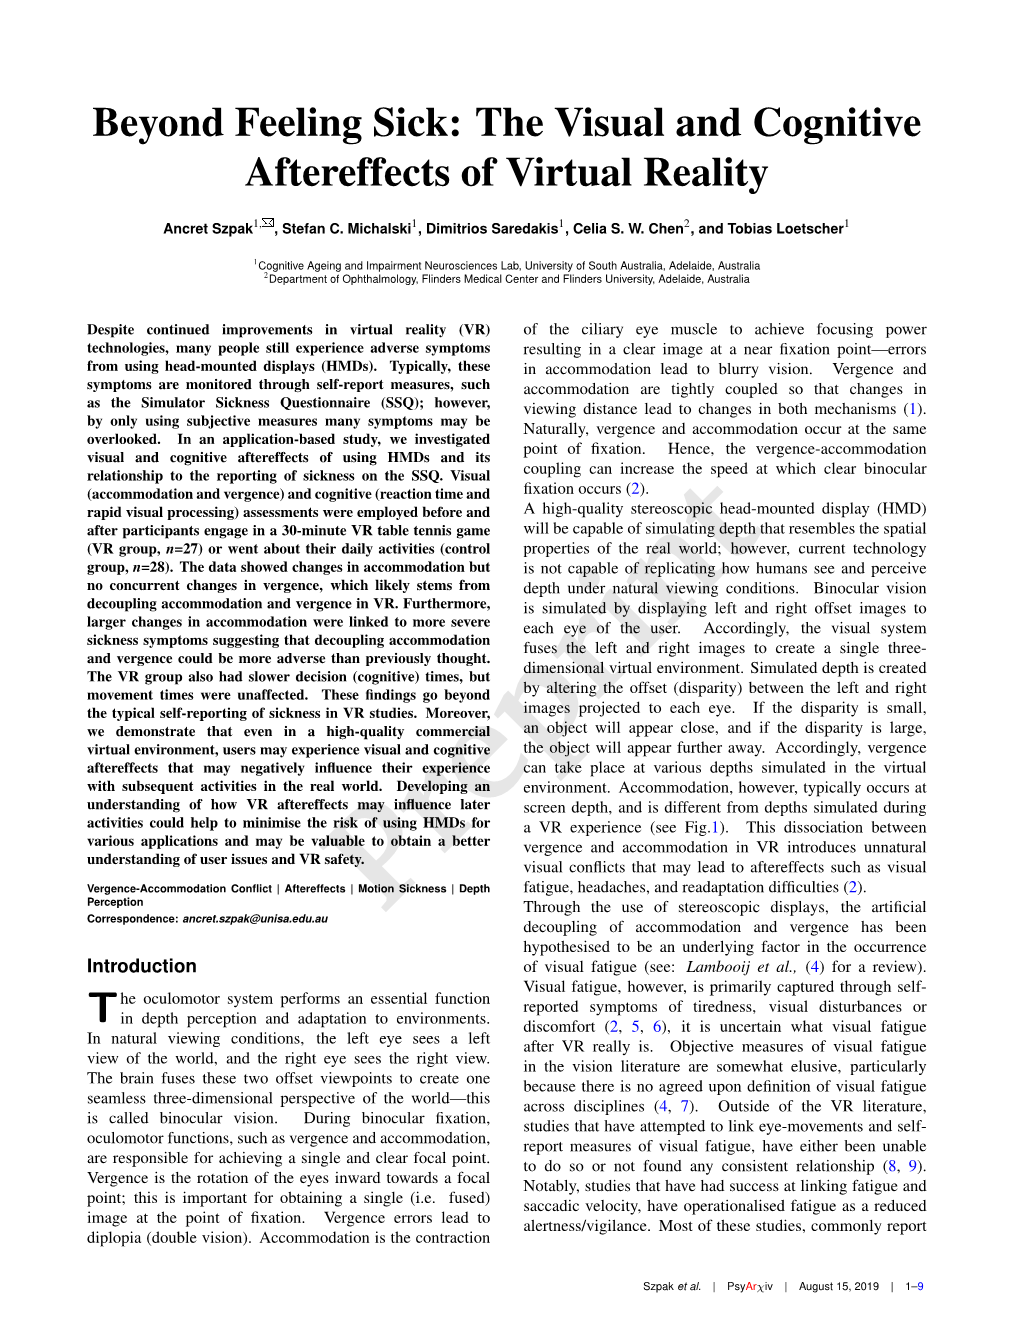 Beyond Feeling Sick: the Visual and Cognitive Aftereffects of Virtual Reality